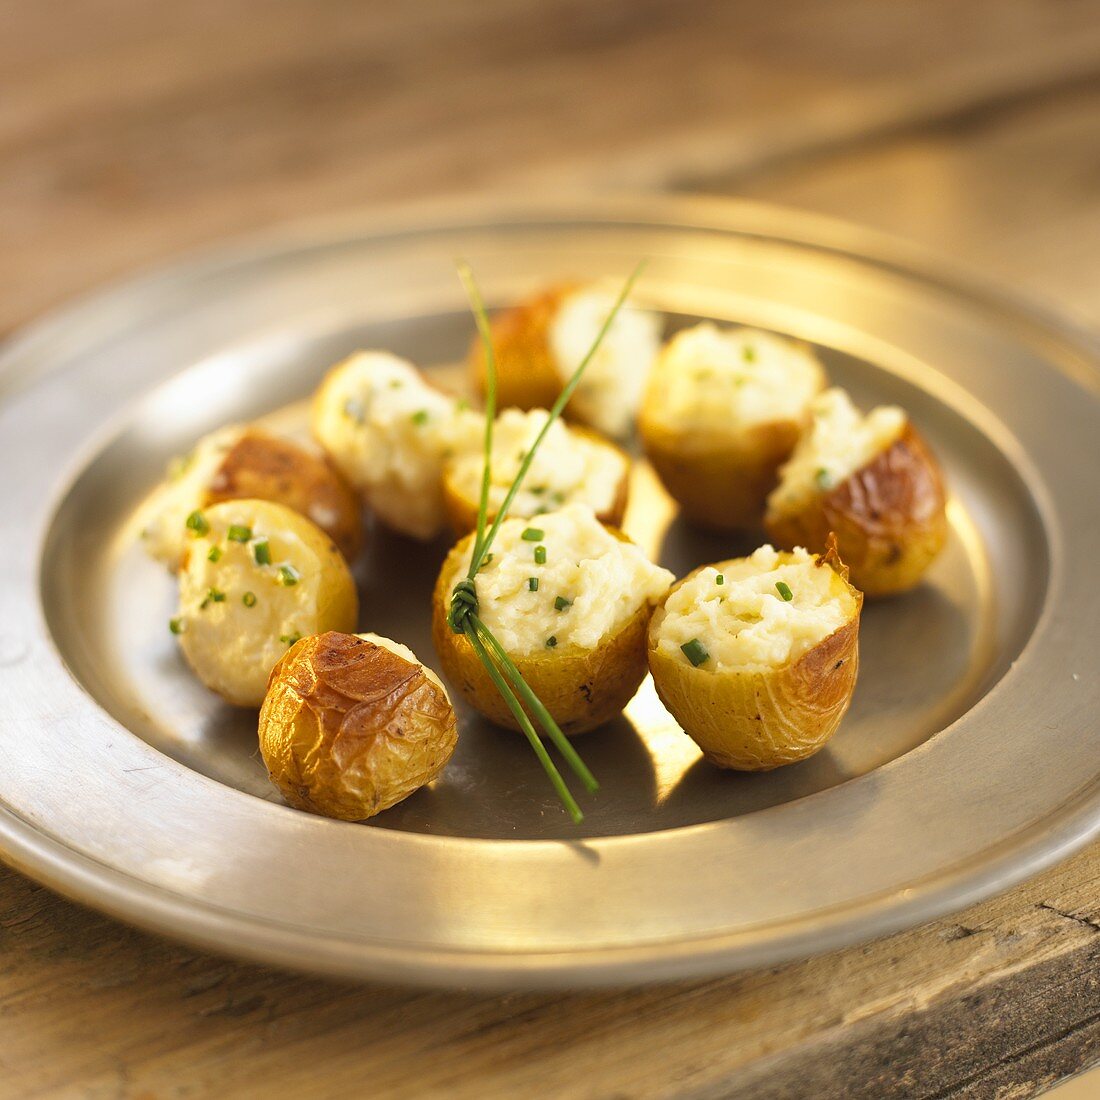 Small baked potatoes with chives on pewter plate